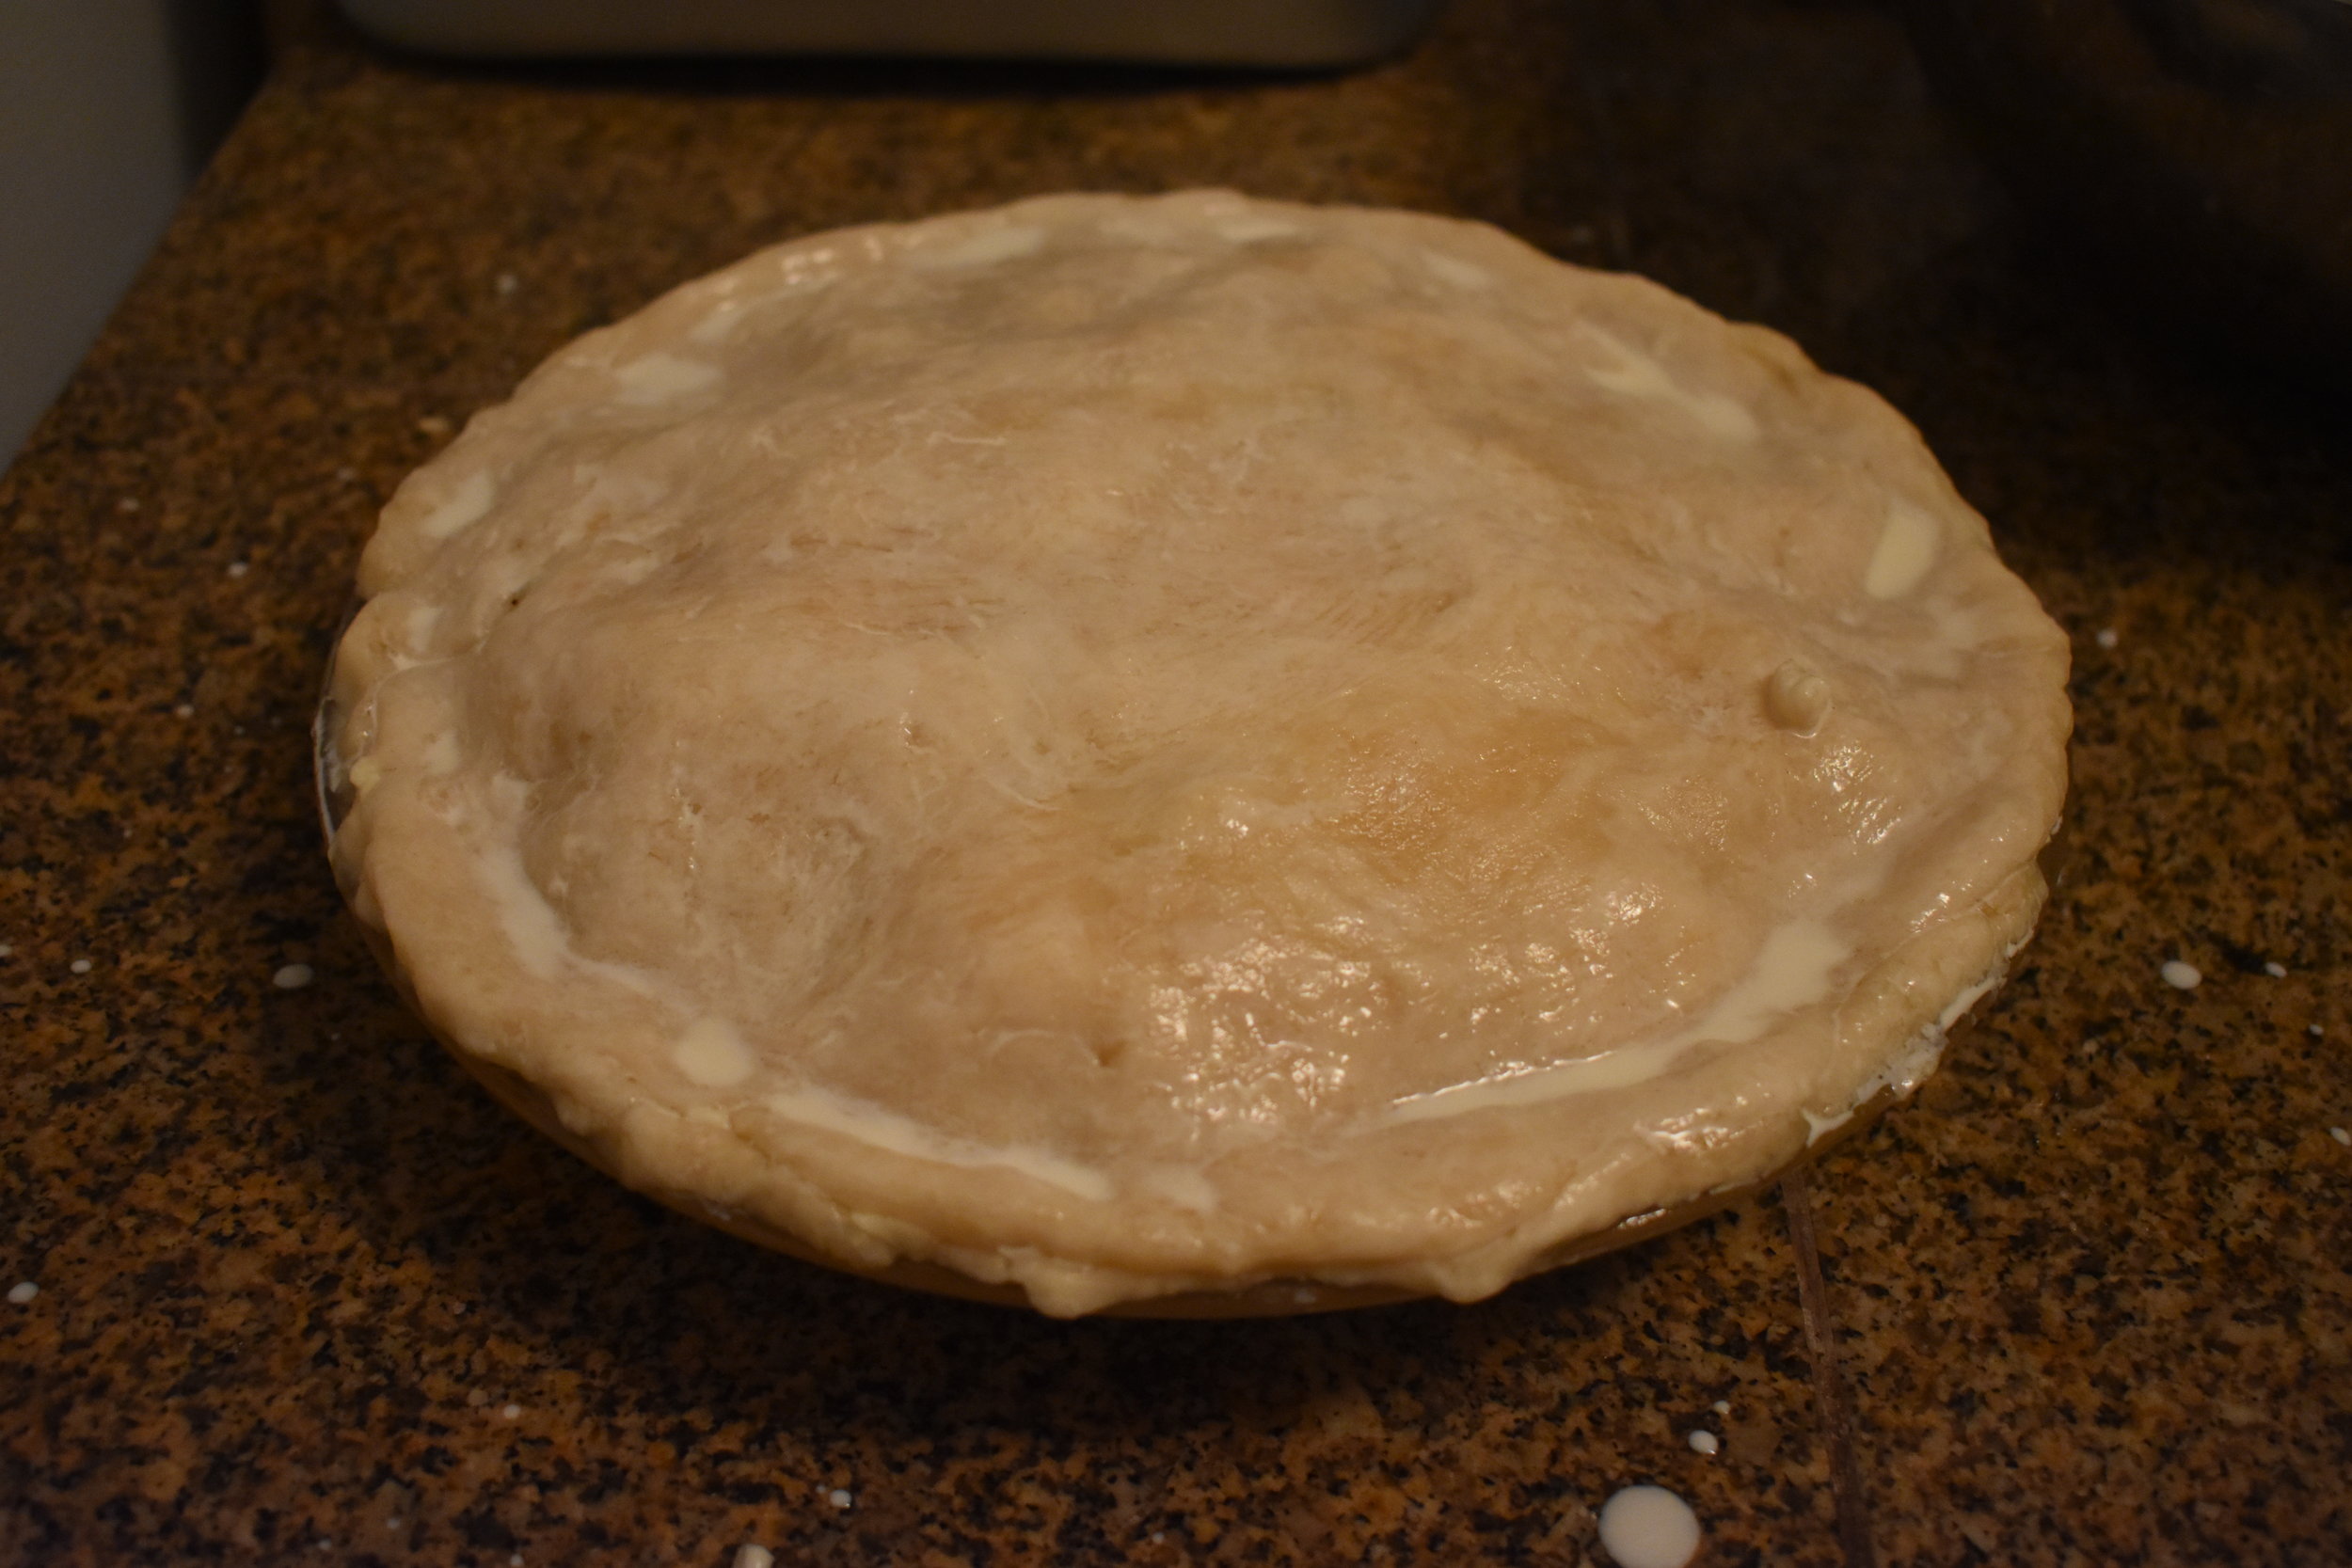  Press and crimp edges, gloss crust with heavy cream. 